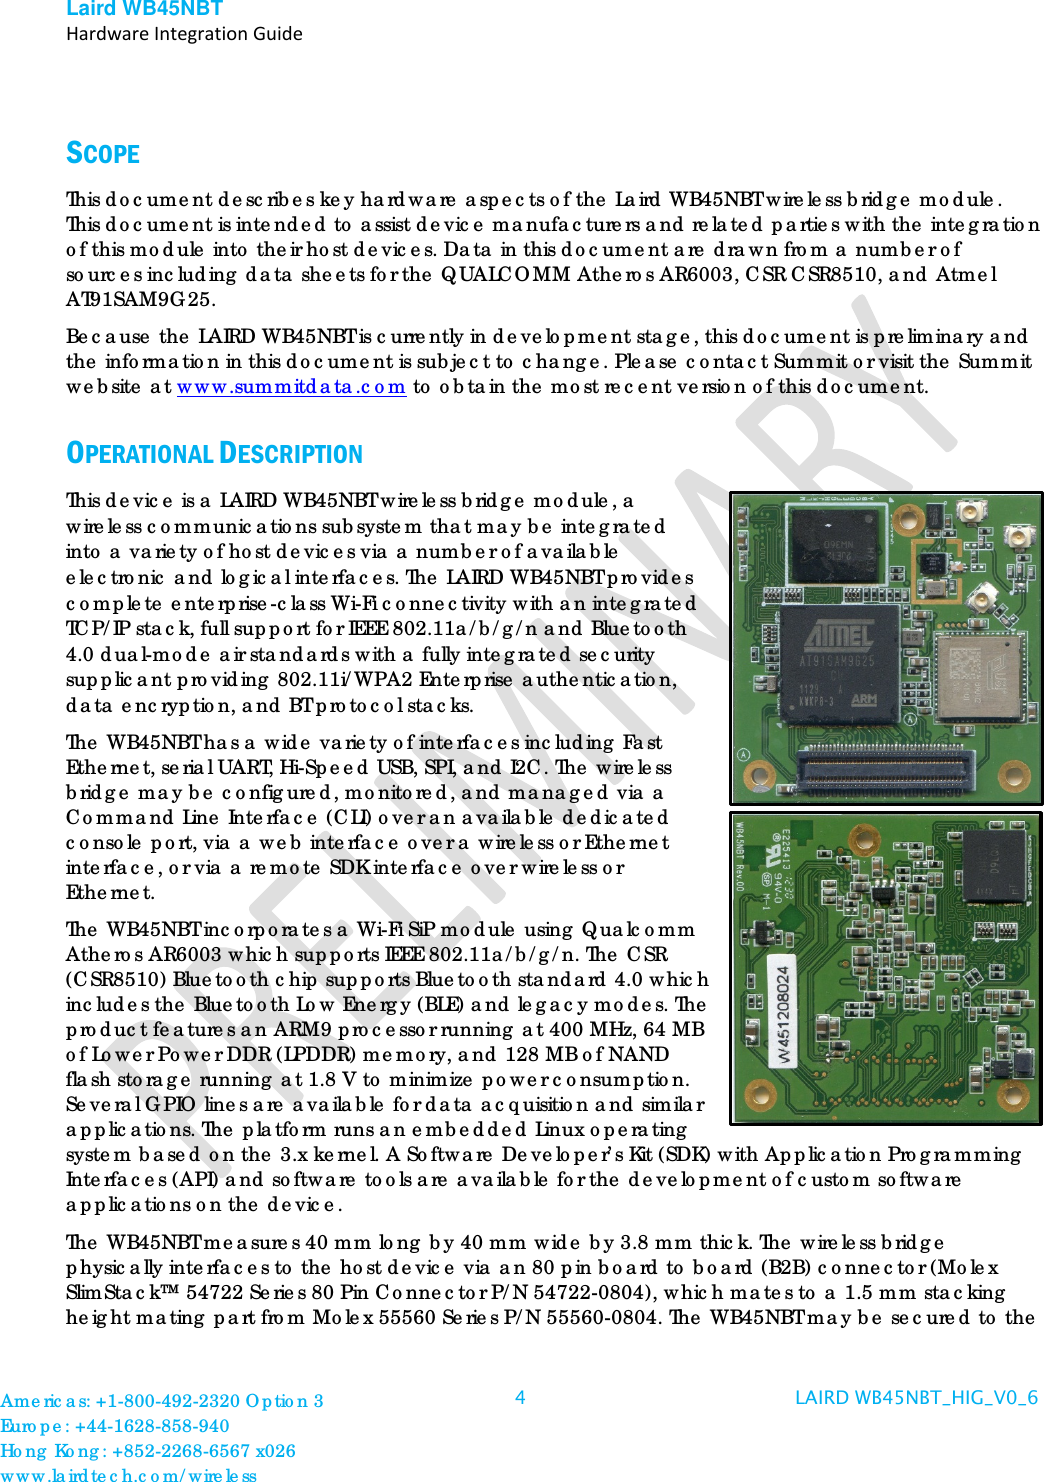 Laird WB45NBT   Hardware Integration Guide   SCOPE This document describes key hardware aspects of the Laird WB45NBT wireless bridge module. This document is intended to assist device manufacturers and related parties with the integration of this module into their host devices. Data in this document are drawn from a number of sources including data sheets for the QUALCOMM Atheros AR6003, CSR CSR8510, and Atmel AT91SAM9G25.  Because the LAIRD WB45NBT is currently in development stage, this document is preliminary and the information in this document is subject to change. Please contact Summit or visit the Summit website at www.summitdata.com to obtain the most recent version of this document. OPERATIONAL DESCRIPTION This device is a LAIRD WB45NBT wireless bridge module, a wireless communications subsystem that may be integrated into a variety of host devices via a number of available electronic and logical interfaces. The LAIRD WB45NBT provides complete enterprise-class Wi-Fi connectivity with an integrated TCP/IP stack, full support for IEEE 802.11a/b/g/n and Bluetooth 4.0 dual-mode air standards with a fully integrated security supplicant providing 802.11i/WPA2 Enterprise authentication, data encryption, and BT protocol stacks. The WB45NBT has a wide variety of interfaces including Fast Ethernet, serial UART, Hi-Speed USB, SPI, and I2C. The wireless bridge may be configured, monitored, and managed via a Command Line Interface (CLI) over an available dedicated console port, via a web interface over a wireless or Ethernet interface, or via a remote SDK interface over wireless or Ethernet.  The WB45NBT incorporates a Wi-Fi SiP module using Qualcomm Atheros AR6003 which supports IEEE 802.11a/b/g/n. The CSR (CSR8510) Bluetooth chip supports Bluetooth standard 4.0 which includes the Bluetooth Low Energy (BLE) and legacy modes. The product features an ARM9 processor running at 400 MHz, 64 MB of Lower Power DDR (LPDDR) memory, and 128 MB of NAND flash storage running at 1.8 V to minimize power consumption. Several GPIO lines are available for data acquisition and similar applications. The platform runs an embedded Linux operating system based on the 3.x kernel. A Software Developer’s Kit (SDK) with Application Programming Interfaces (API) and software tools are available for the development of custom software applications on the device.  The WB45NBT measures 40 mm long by 40 mm wide by 3.8 mm thick. The wireless bridge physically interfaces to the host device via an 80 pin board to board (B2B) connector (Molex SlimStack™ 54722 Series 80 Pin Connector P/N 54722-0804), which mates to a 1.5 mm stacking height mating part from Molex 55560 Series P/N 55560-0804. The WB45NBT may be secured to the Americas: +1-800-492-2320 Option 3 Europe: +44-1628-858-940 Hong Kong: +852-2268-6567 x026 www.lairdtech.com/wireless 4  LAIRD WB45NBT_HIG_V0_6   